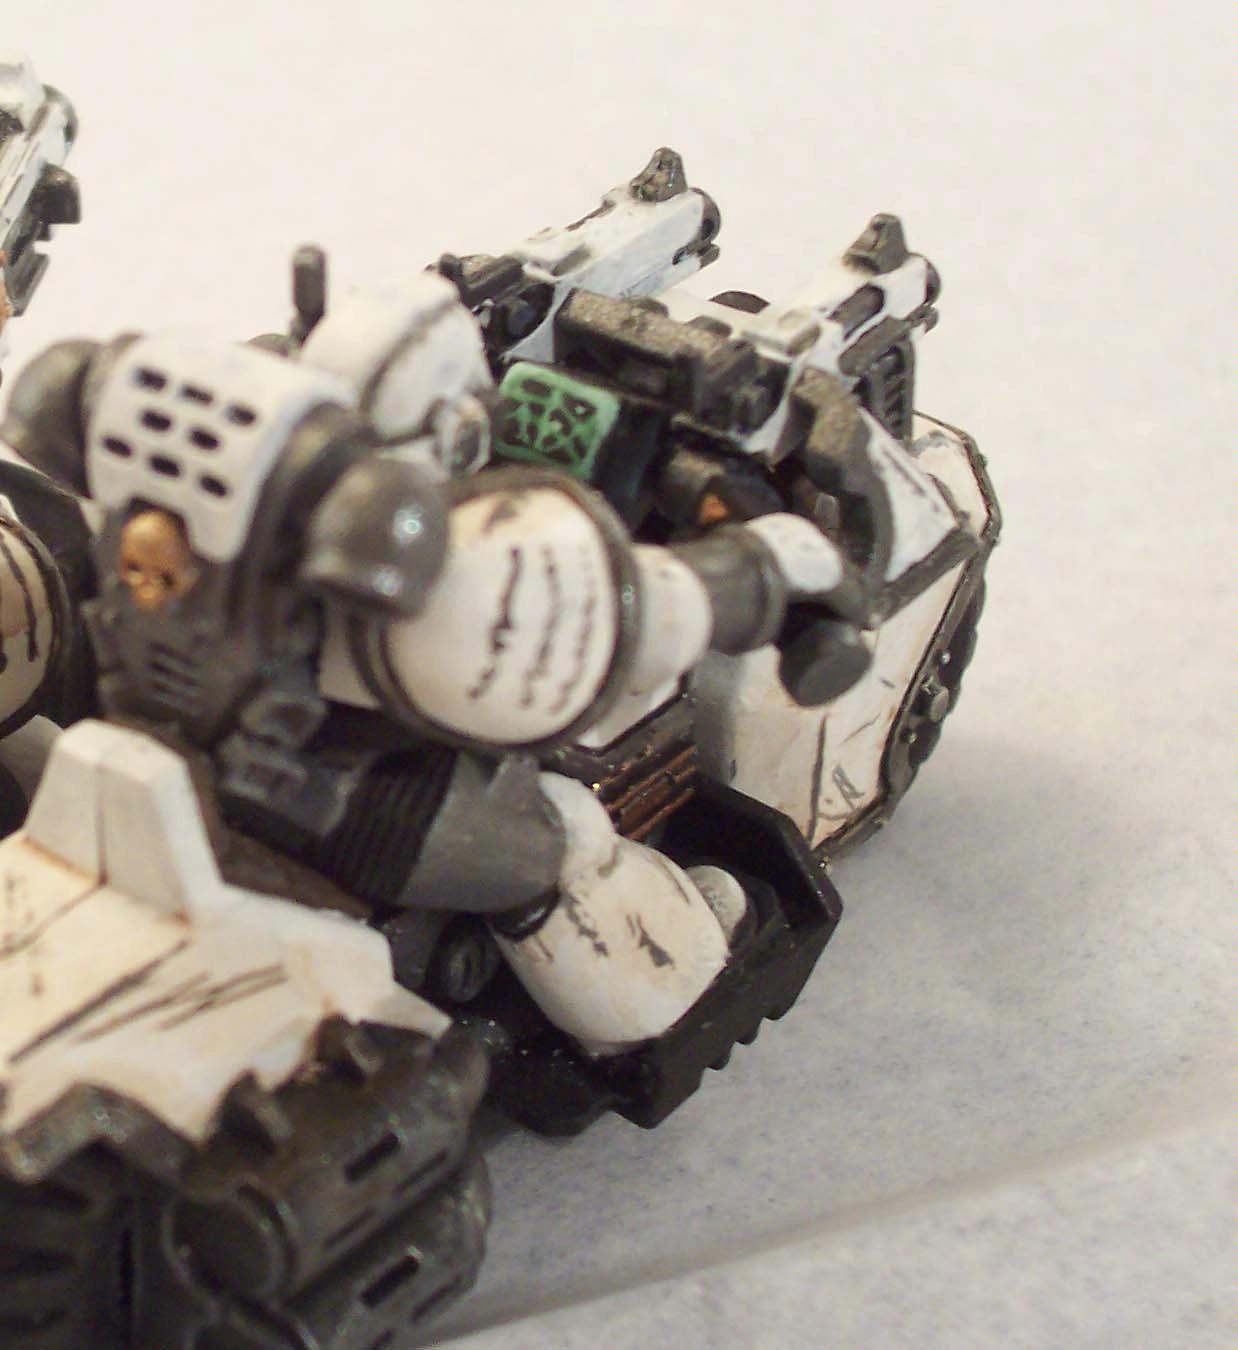 Attack Bike, Celestial Lions, Space Marines, Warhammer 40,000, Weathered